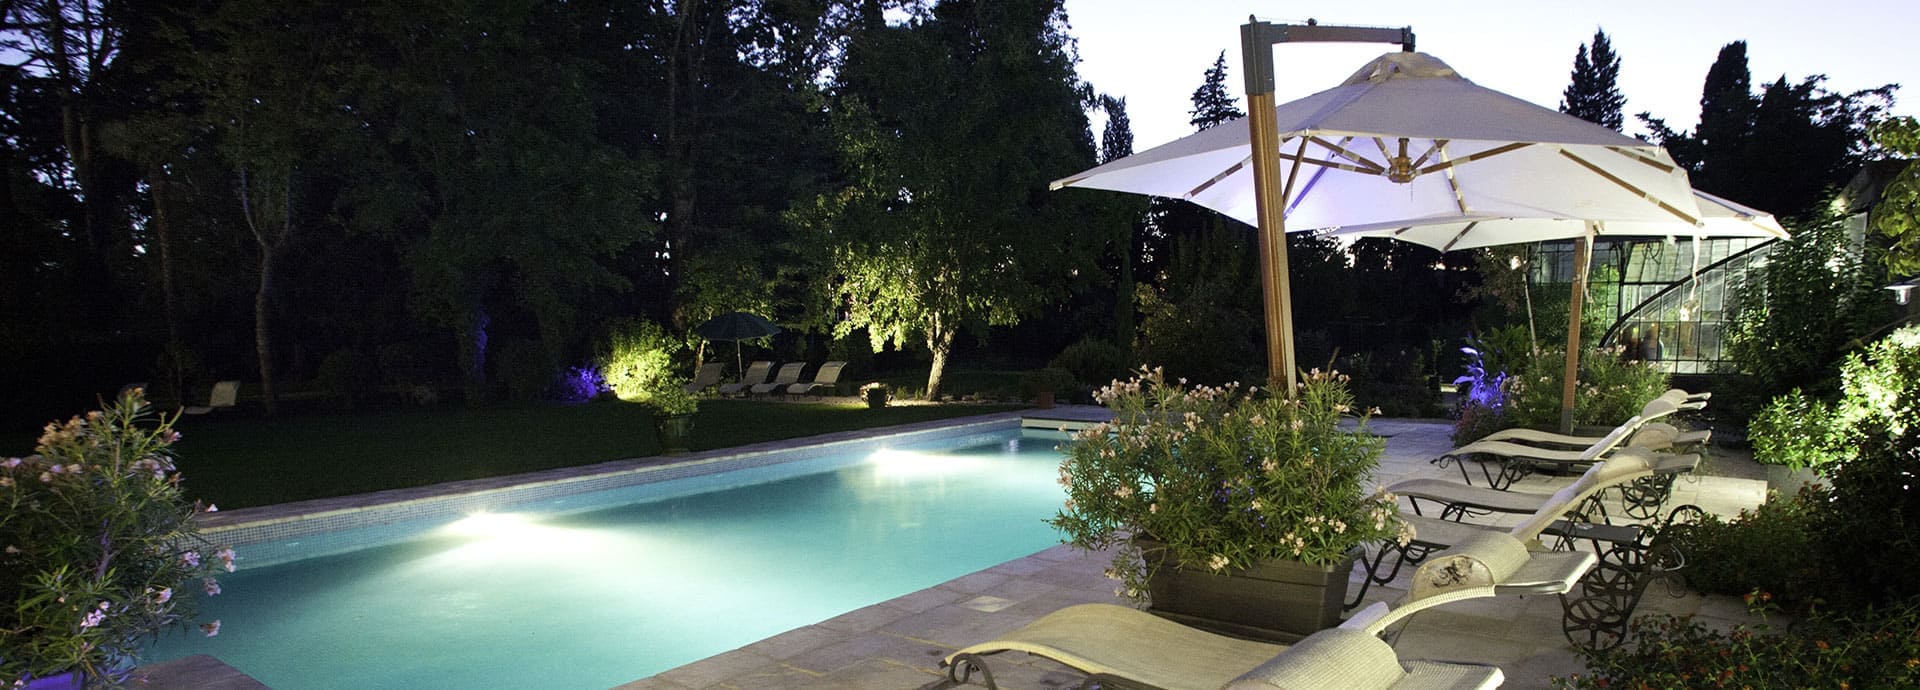 The pool in the relaxation area at night time, Domaine de la Vernède